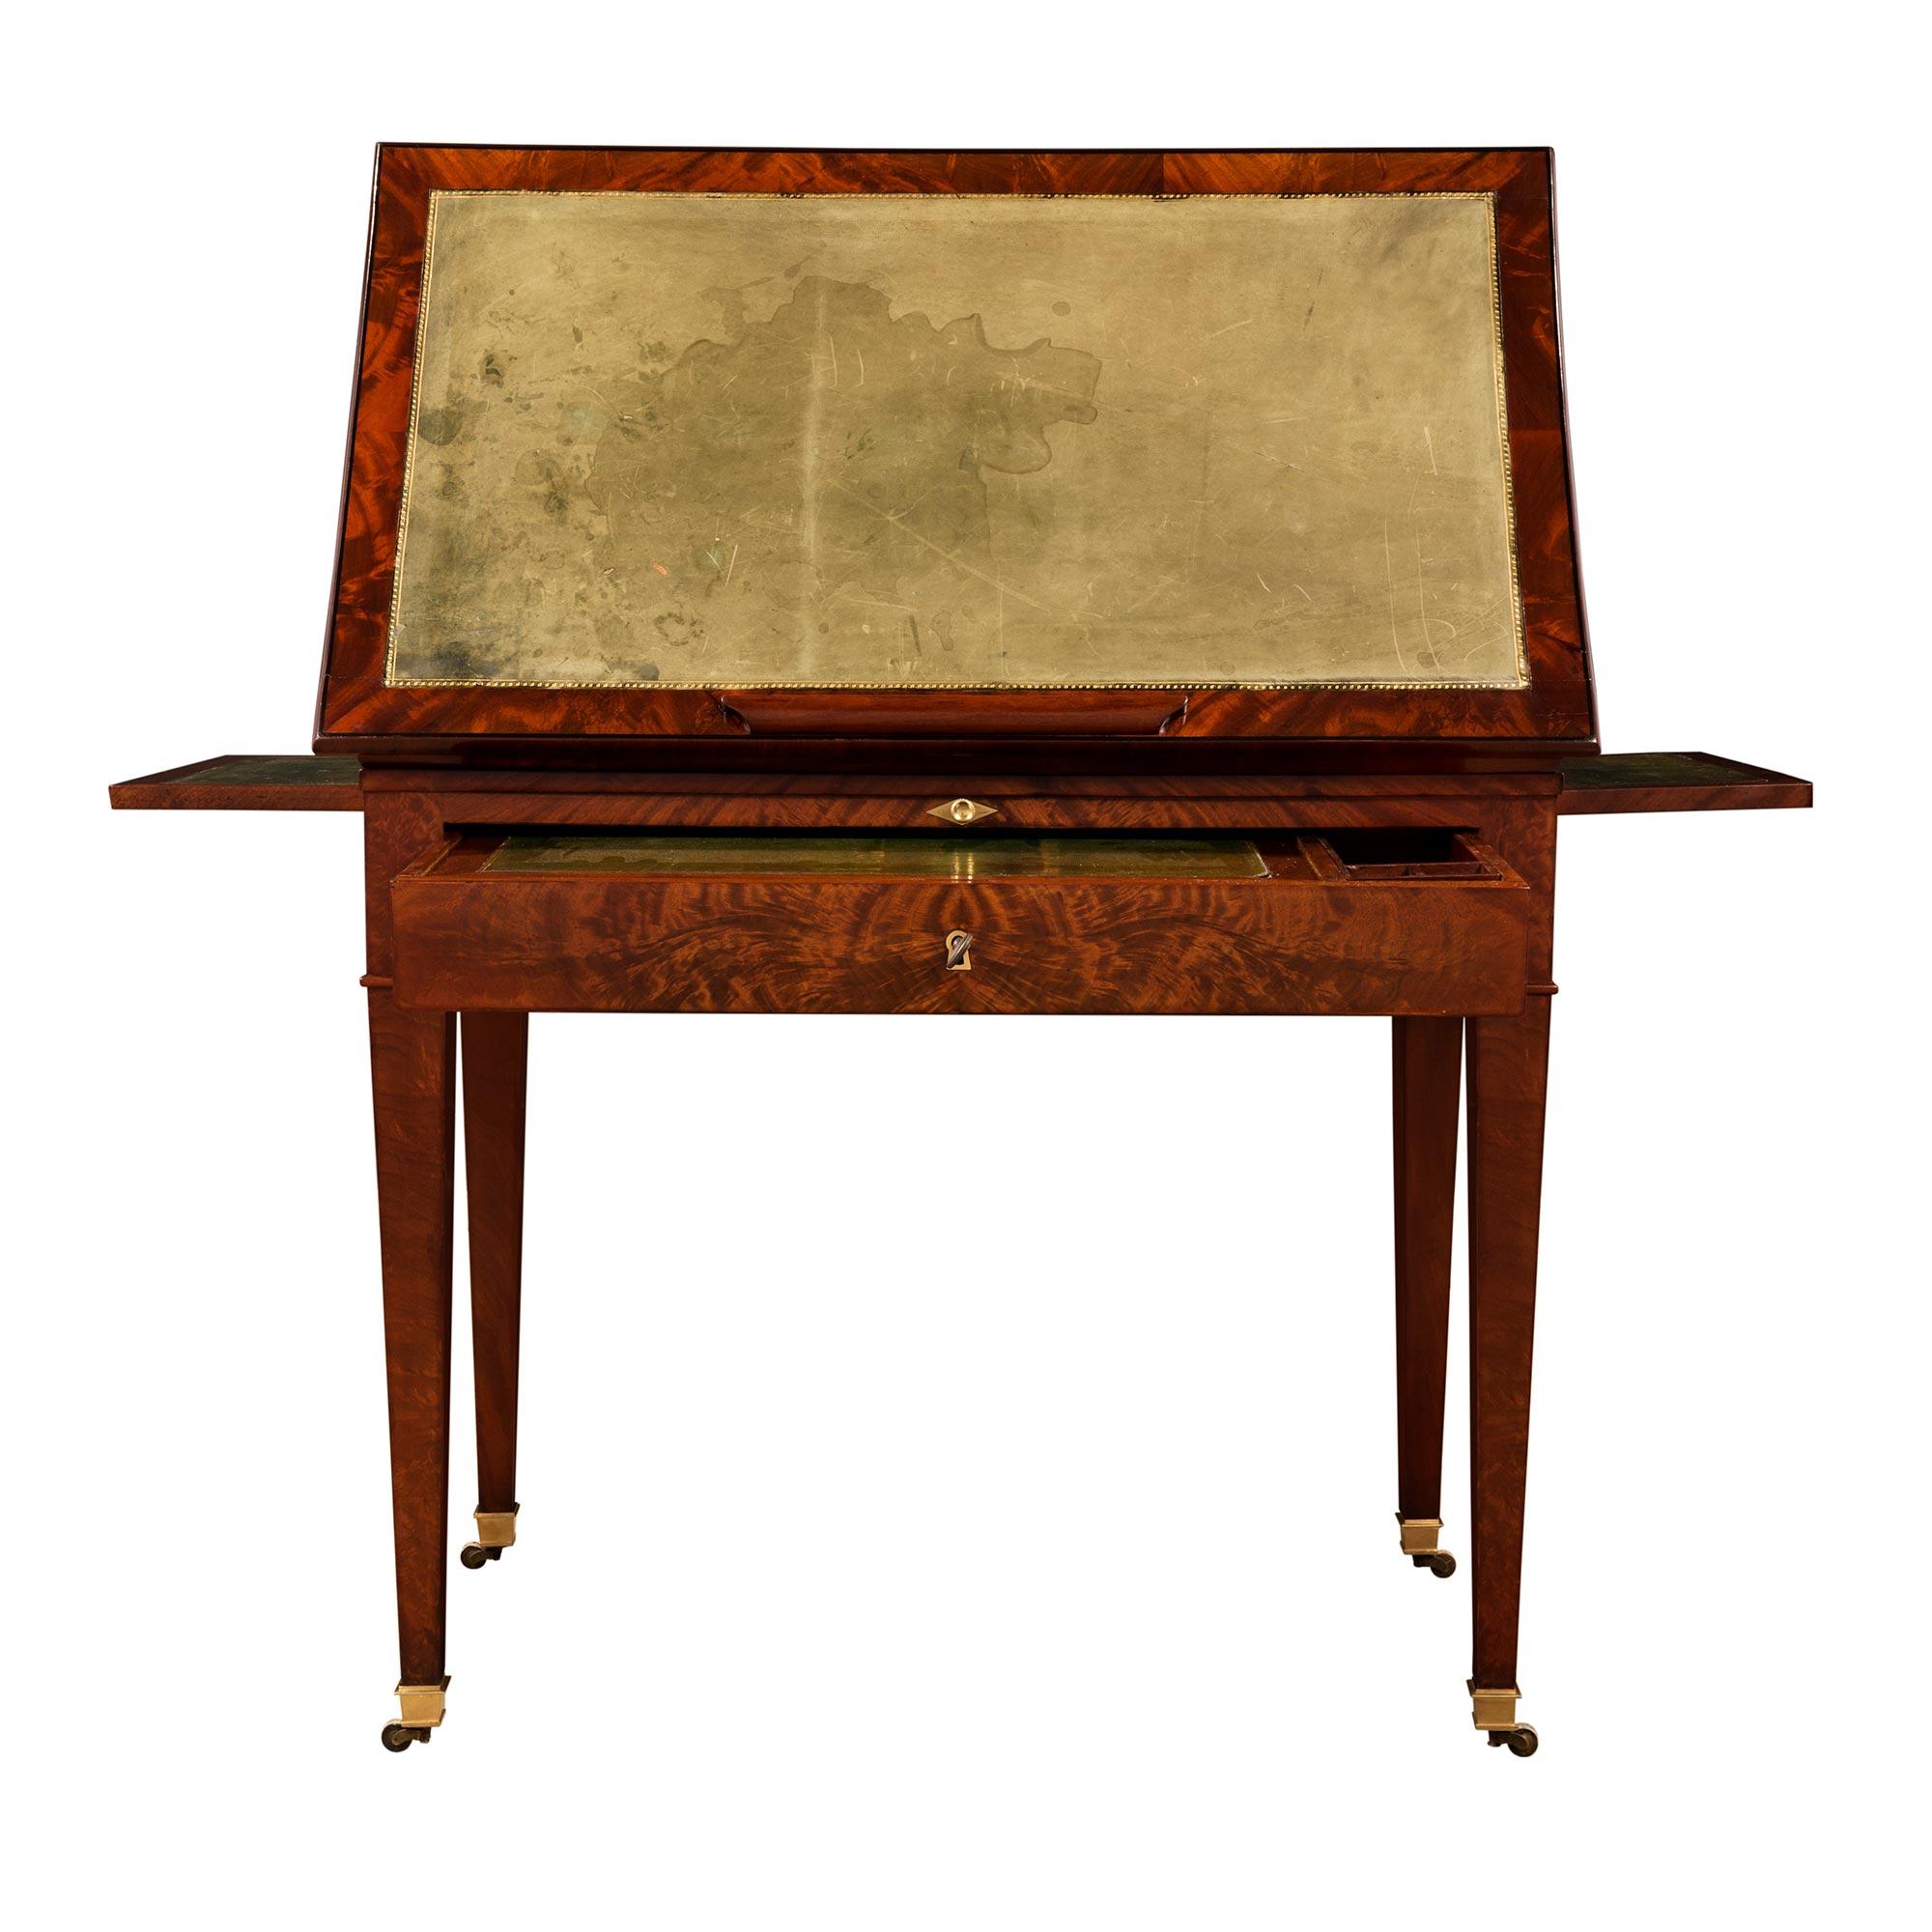 An attractive and unusual French 19th century Louis XVI st. mahogany desk 'A la Tronchin'. The desk is raised by square tapering legs with original ormolu sabots and castors. The straight apron is below a central drawer and at each side is a pull